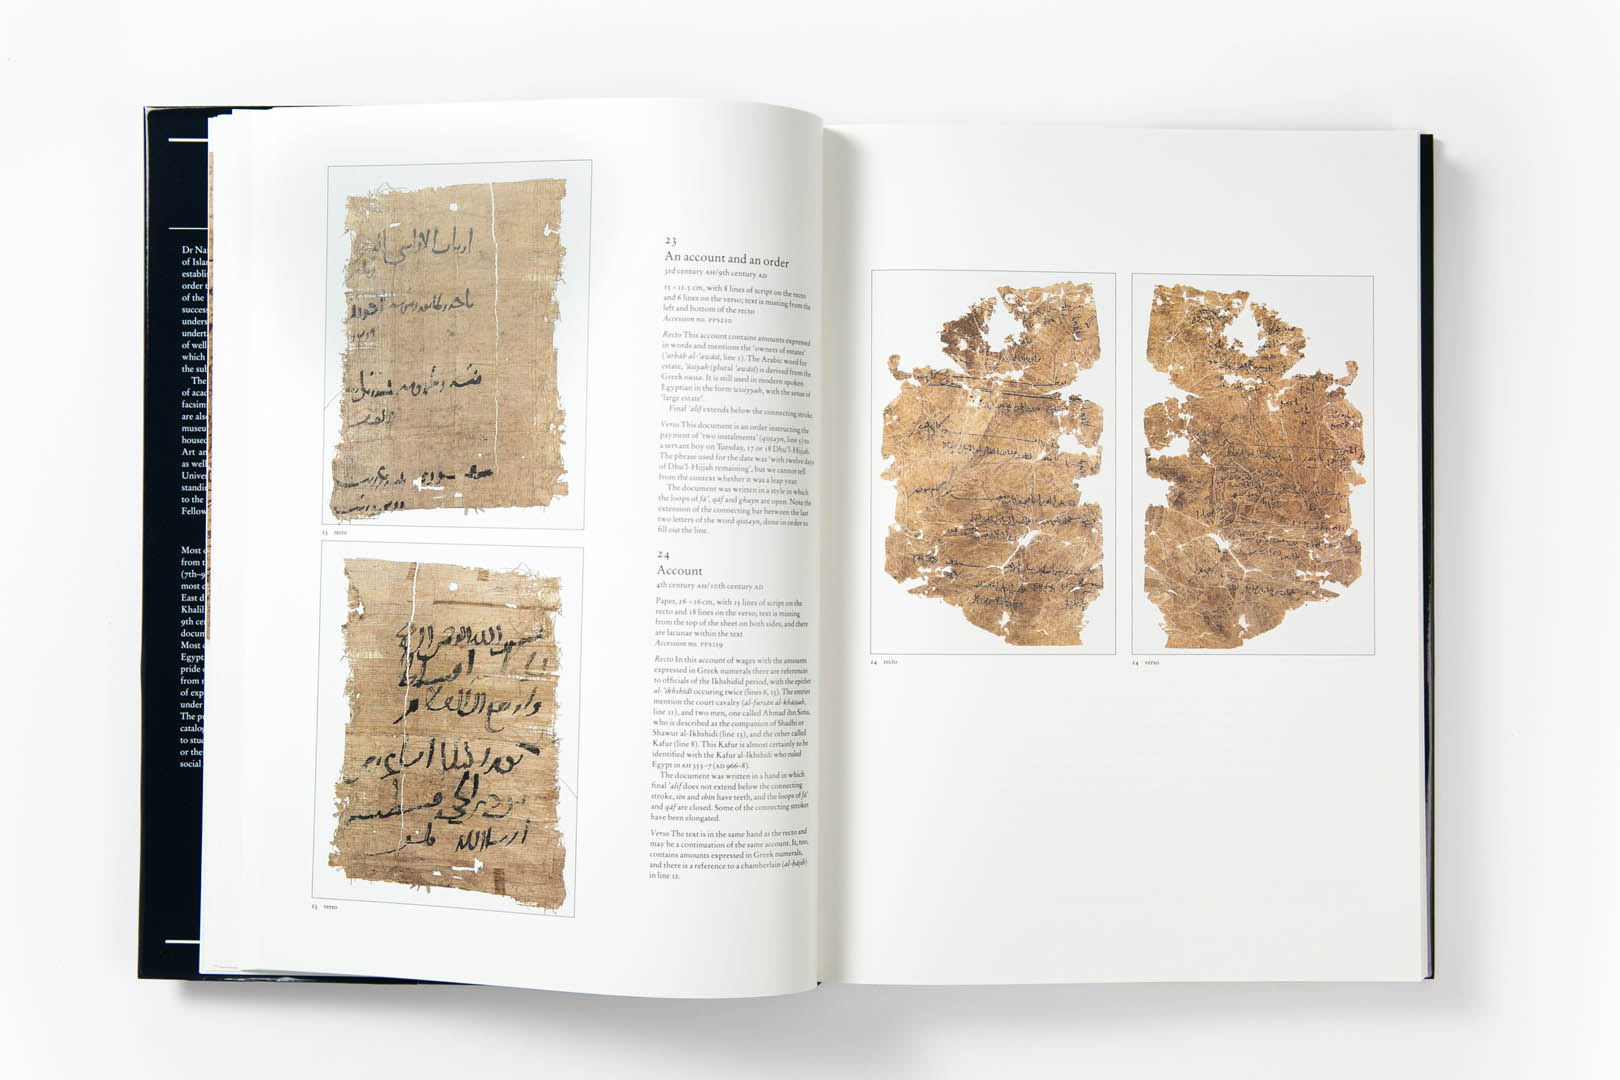 Bills, Letters and Deeds: Arabic Papyri of the 7th to 11th Centuries